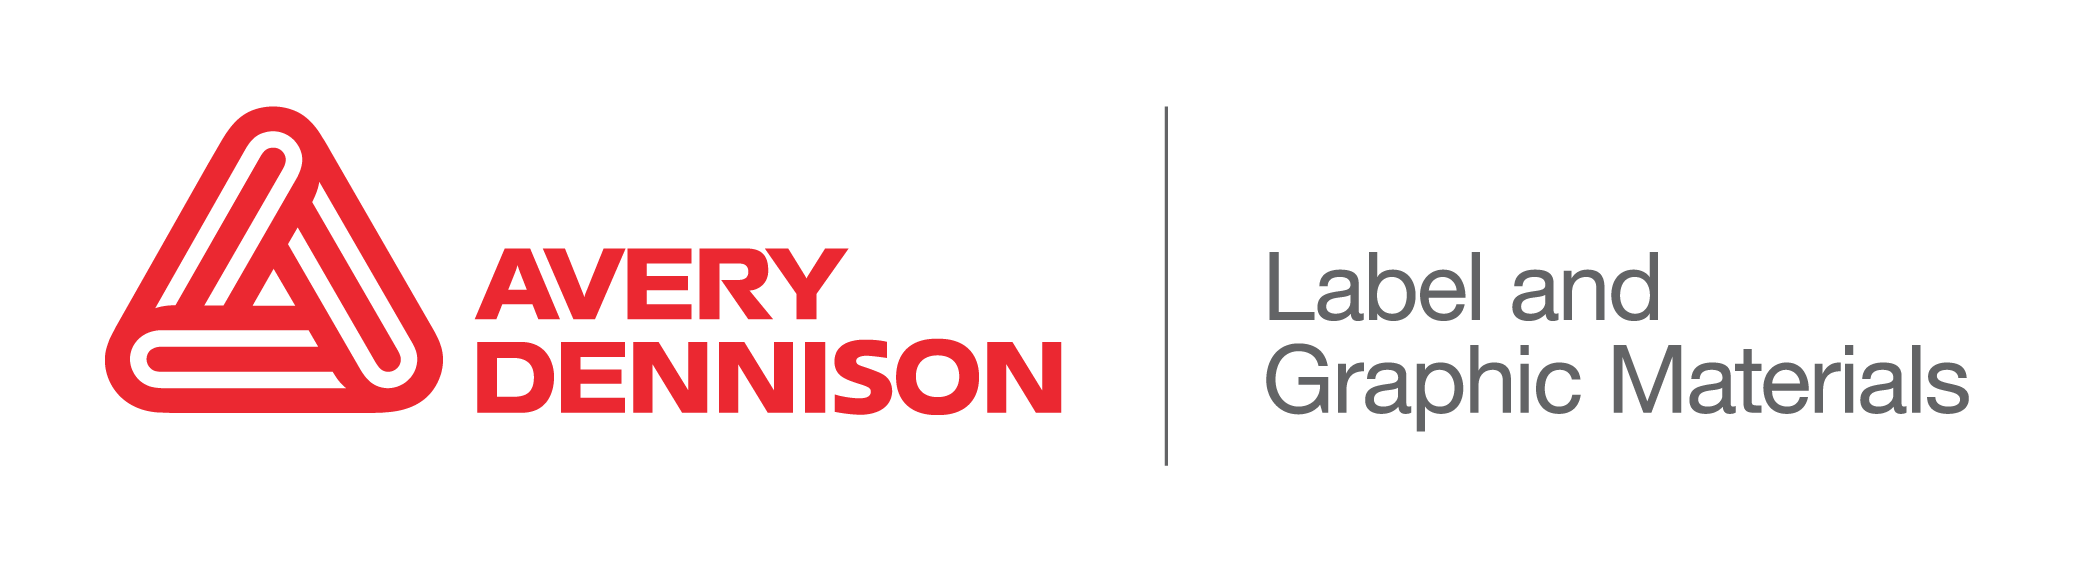 Avery Dennison Luxembourg Sarl